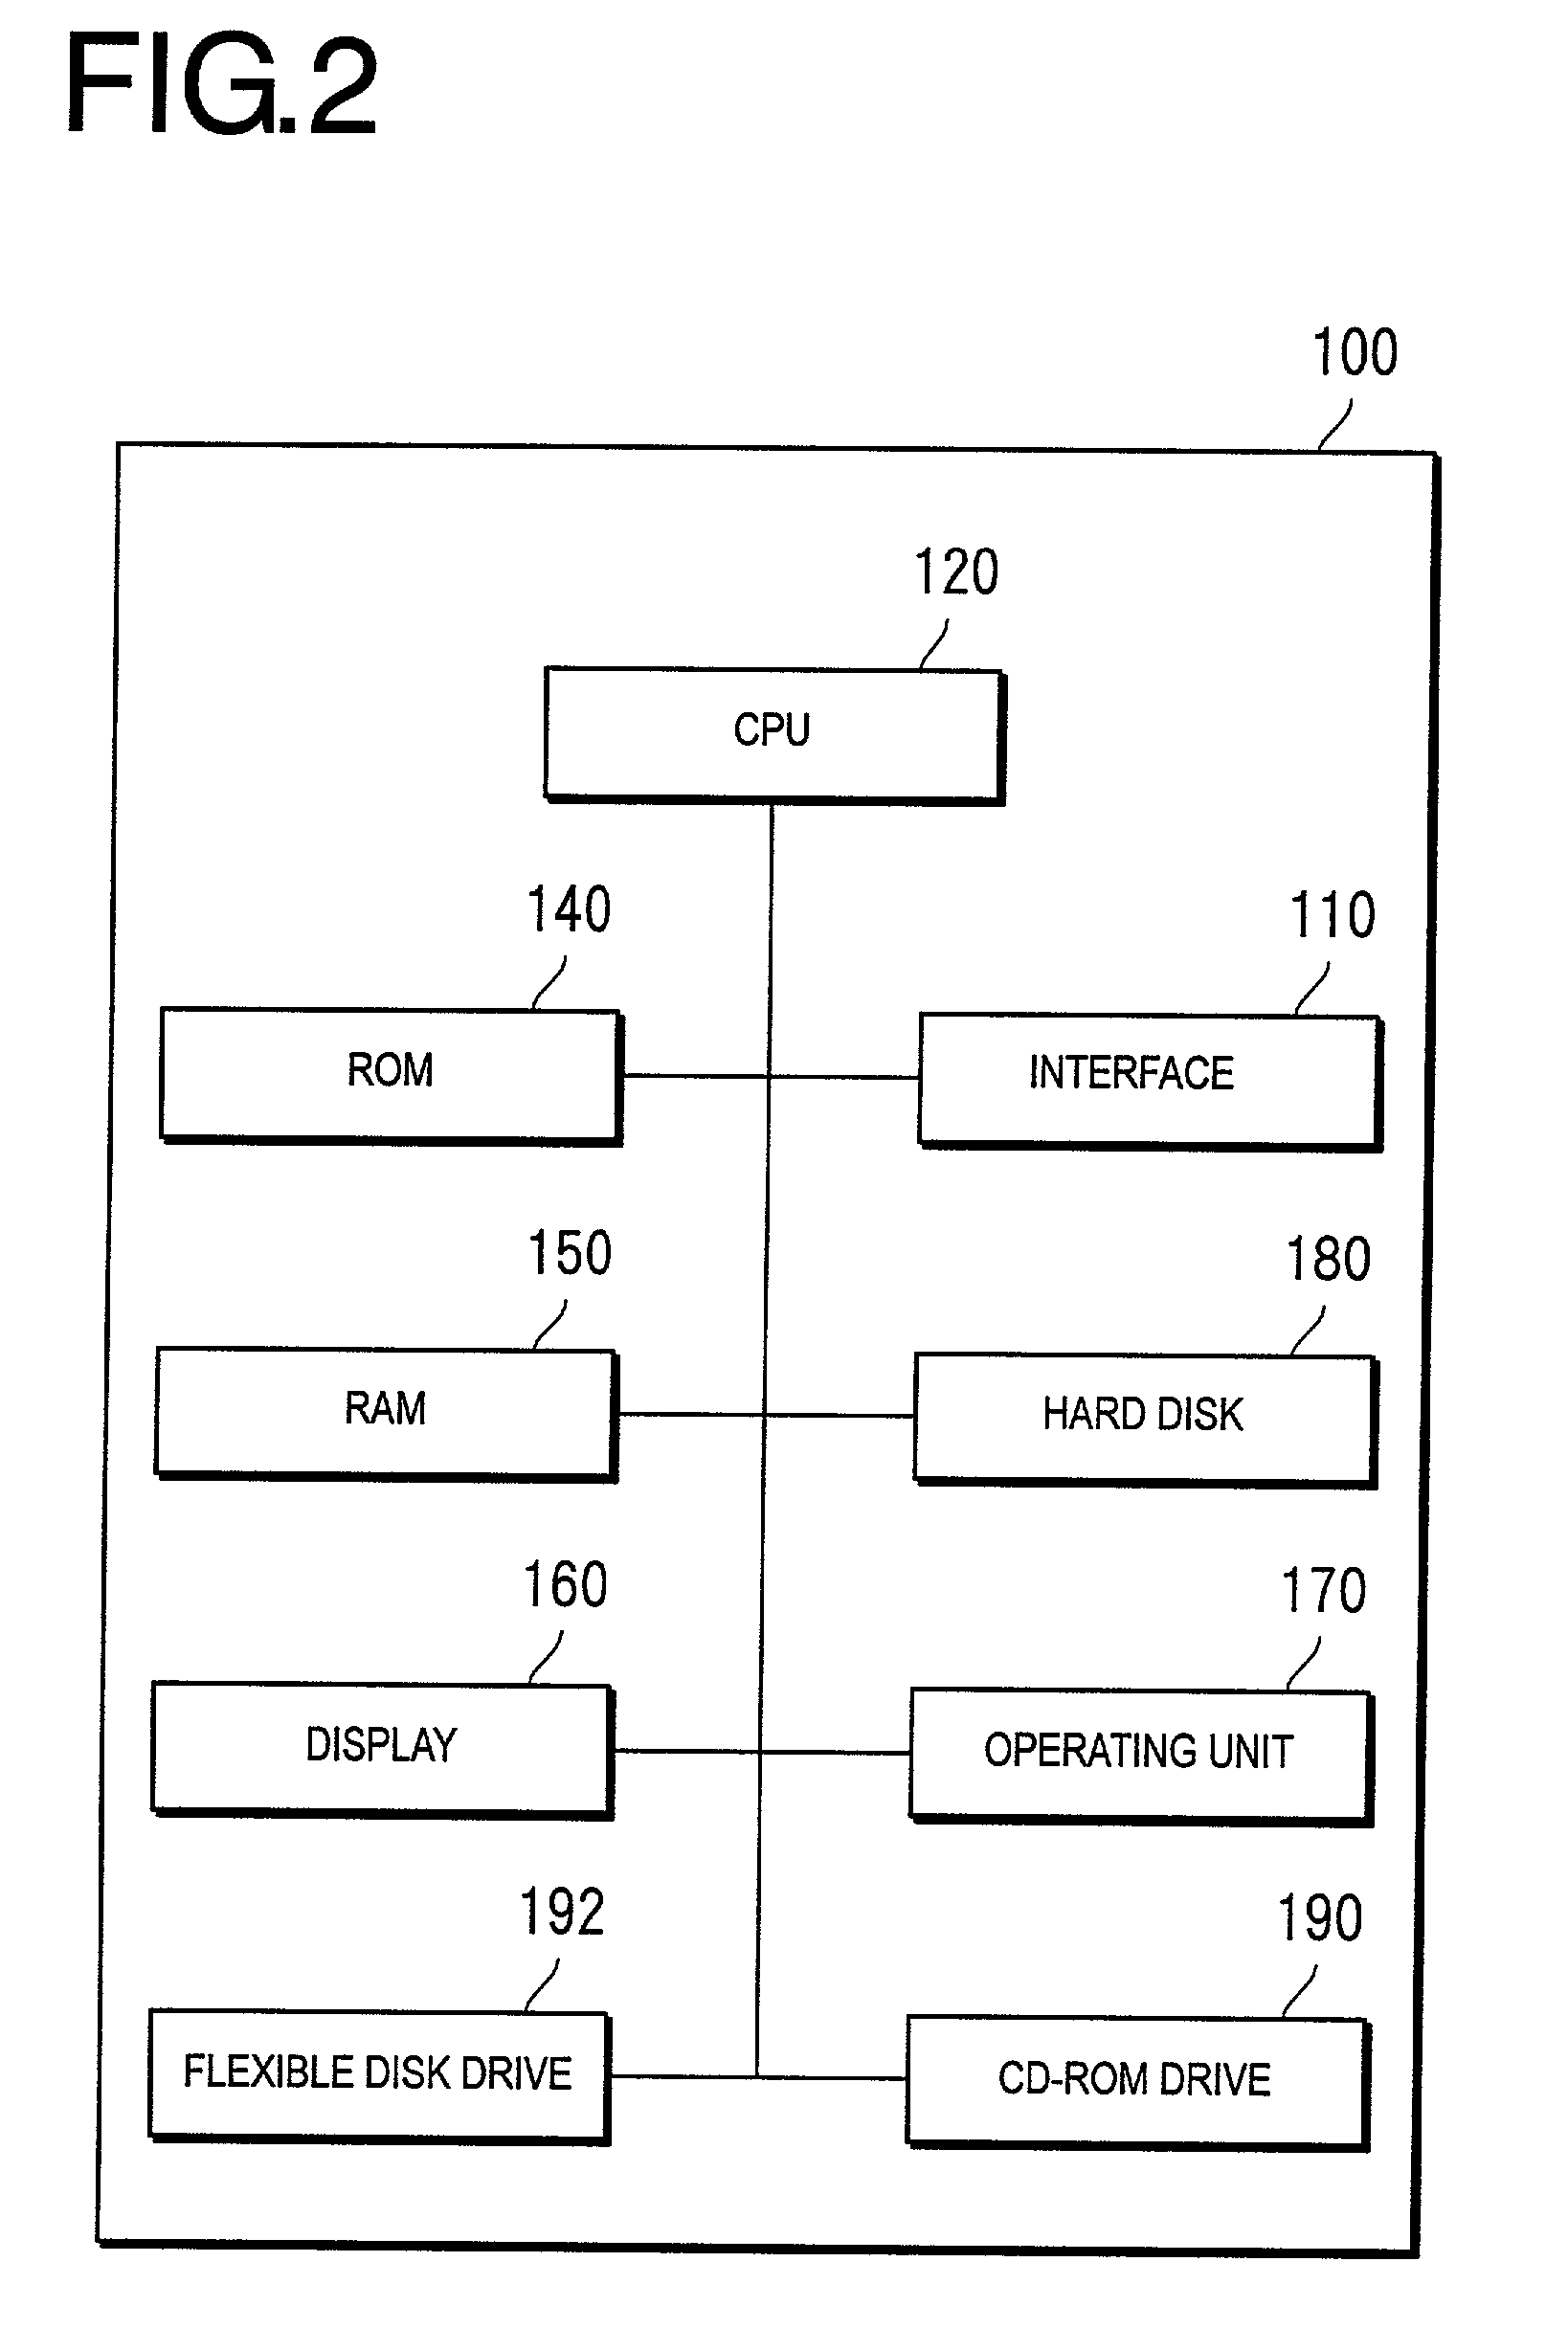 Method for installing a printer driver and computer-readable medium storing installation program